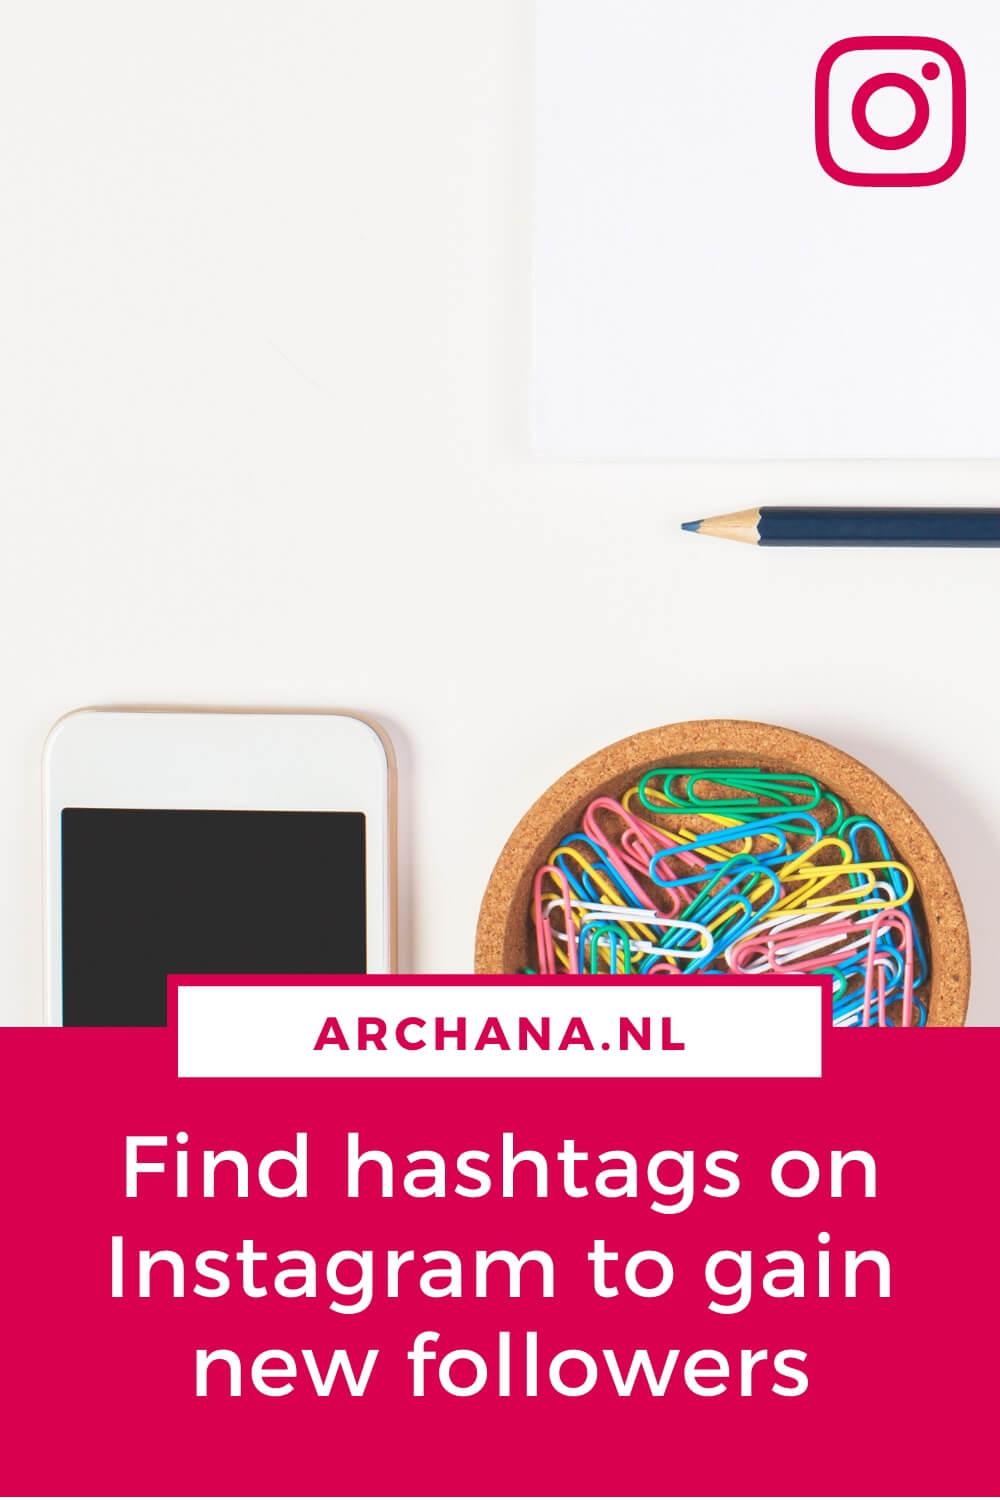 How to seriously find hashtags on Instagram to grow your reach and gain new followers - ARCHANA.NL | If you are using Instagram for your blog, business or brand, you want your photo’s to be seen. Find hashtags on Instagram is one of the first steps when you start Instagram for your business.#instagrammarketing #instagramtips